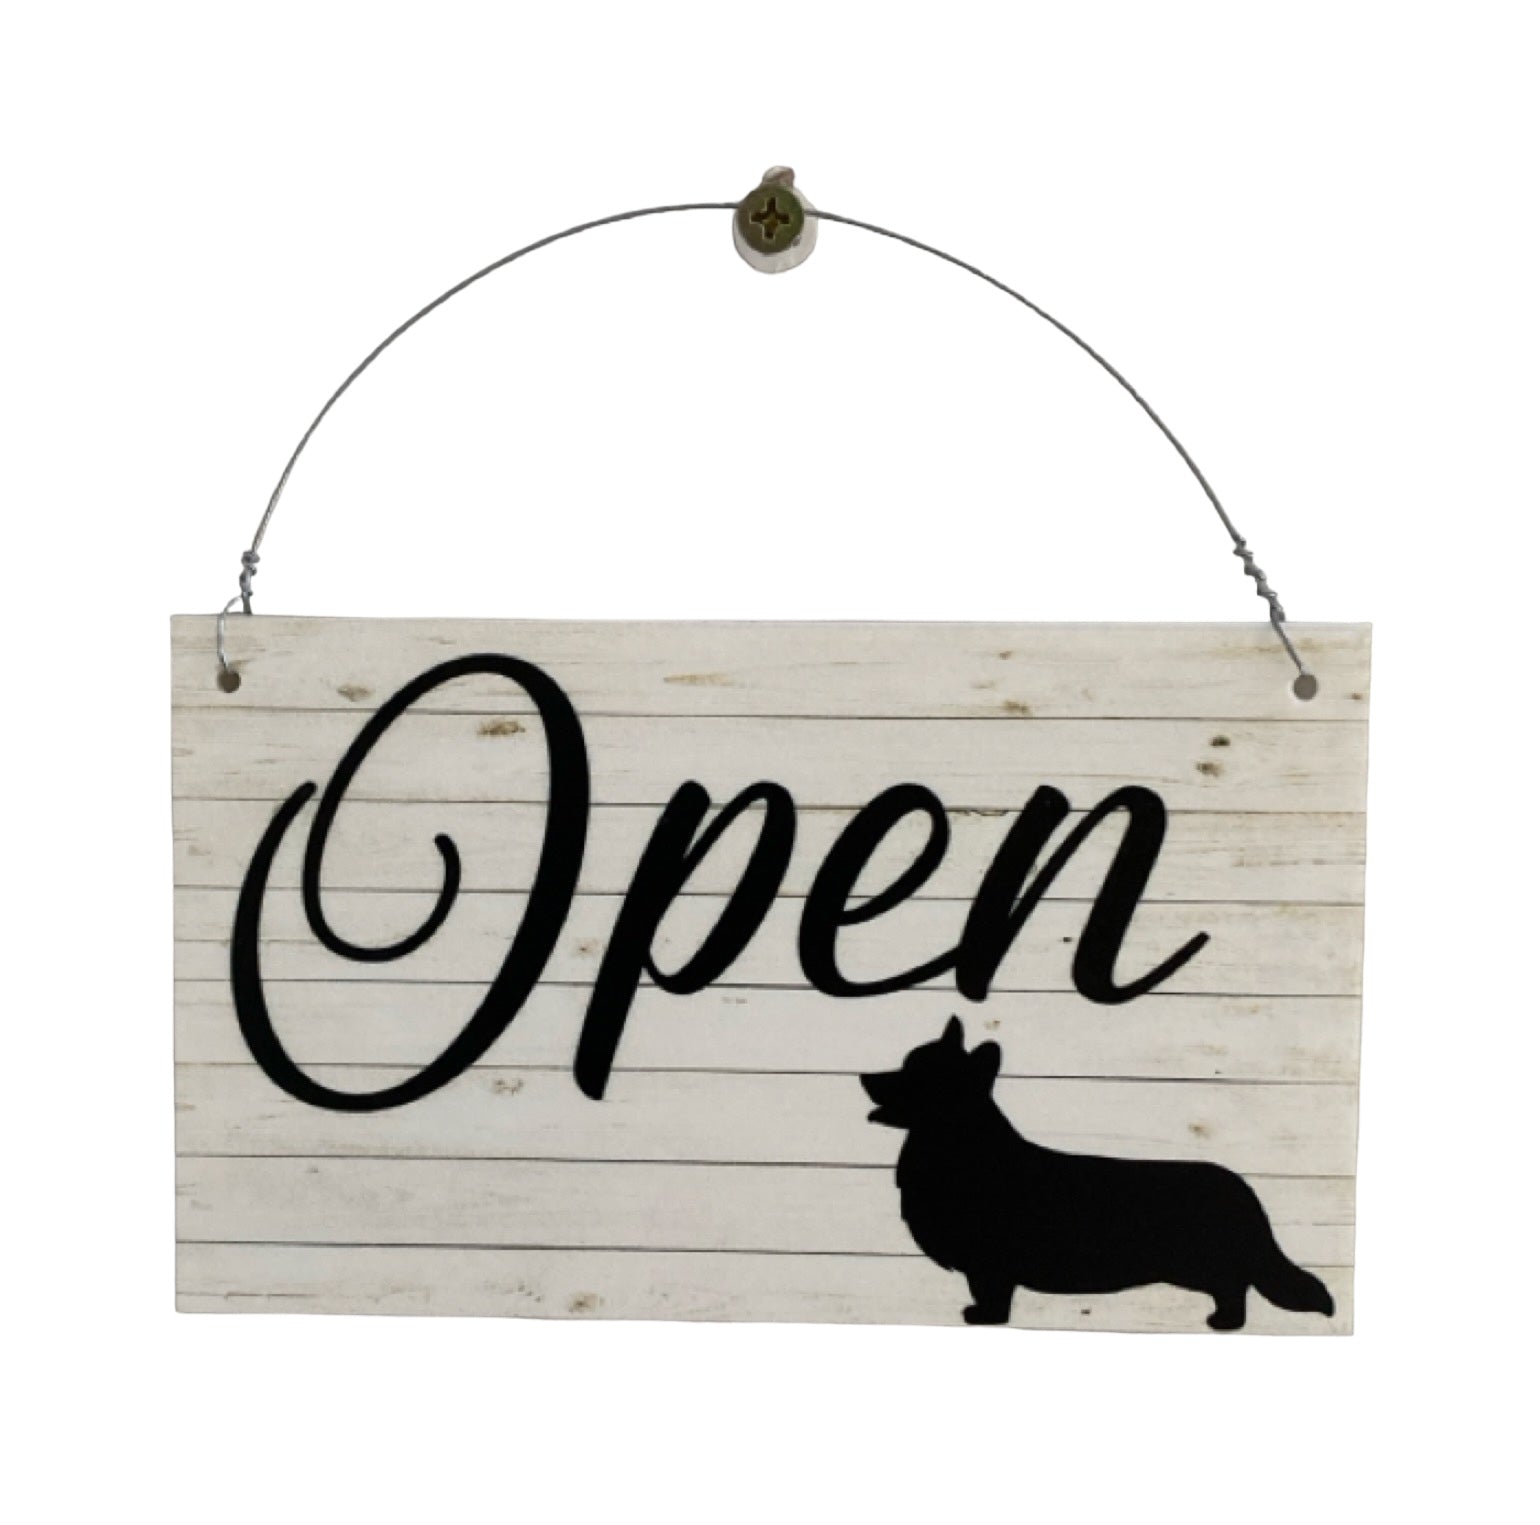 Corgi Open Closed Business Shop Cafe Dog Hanging - The Renmy Store Homewares & Gifts 